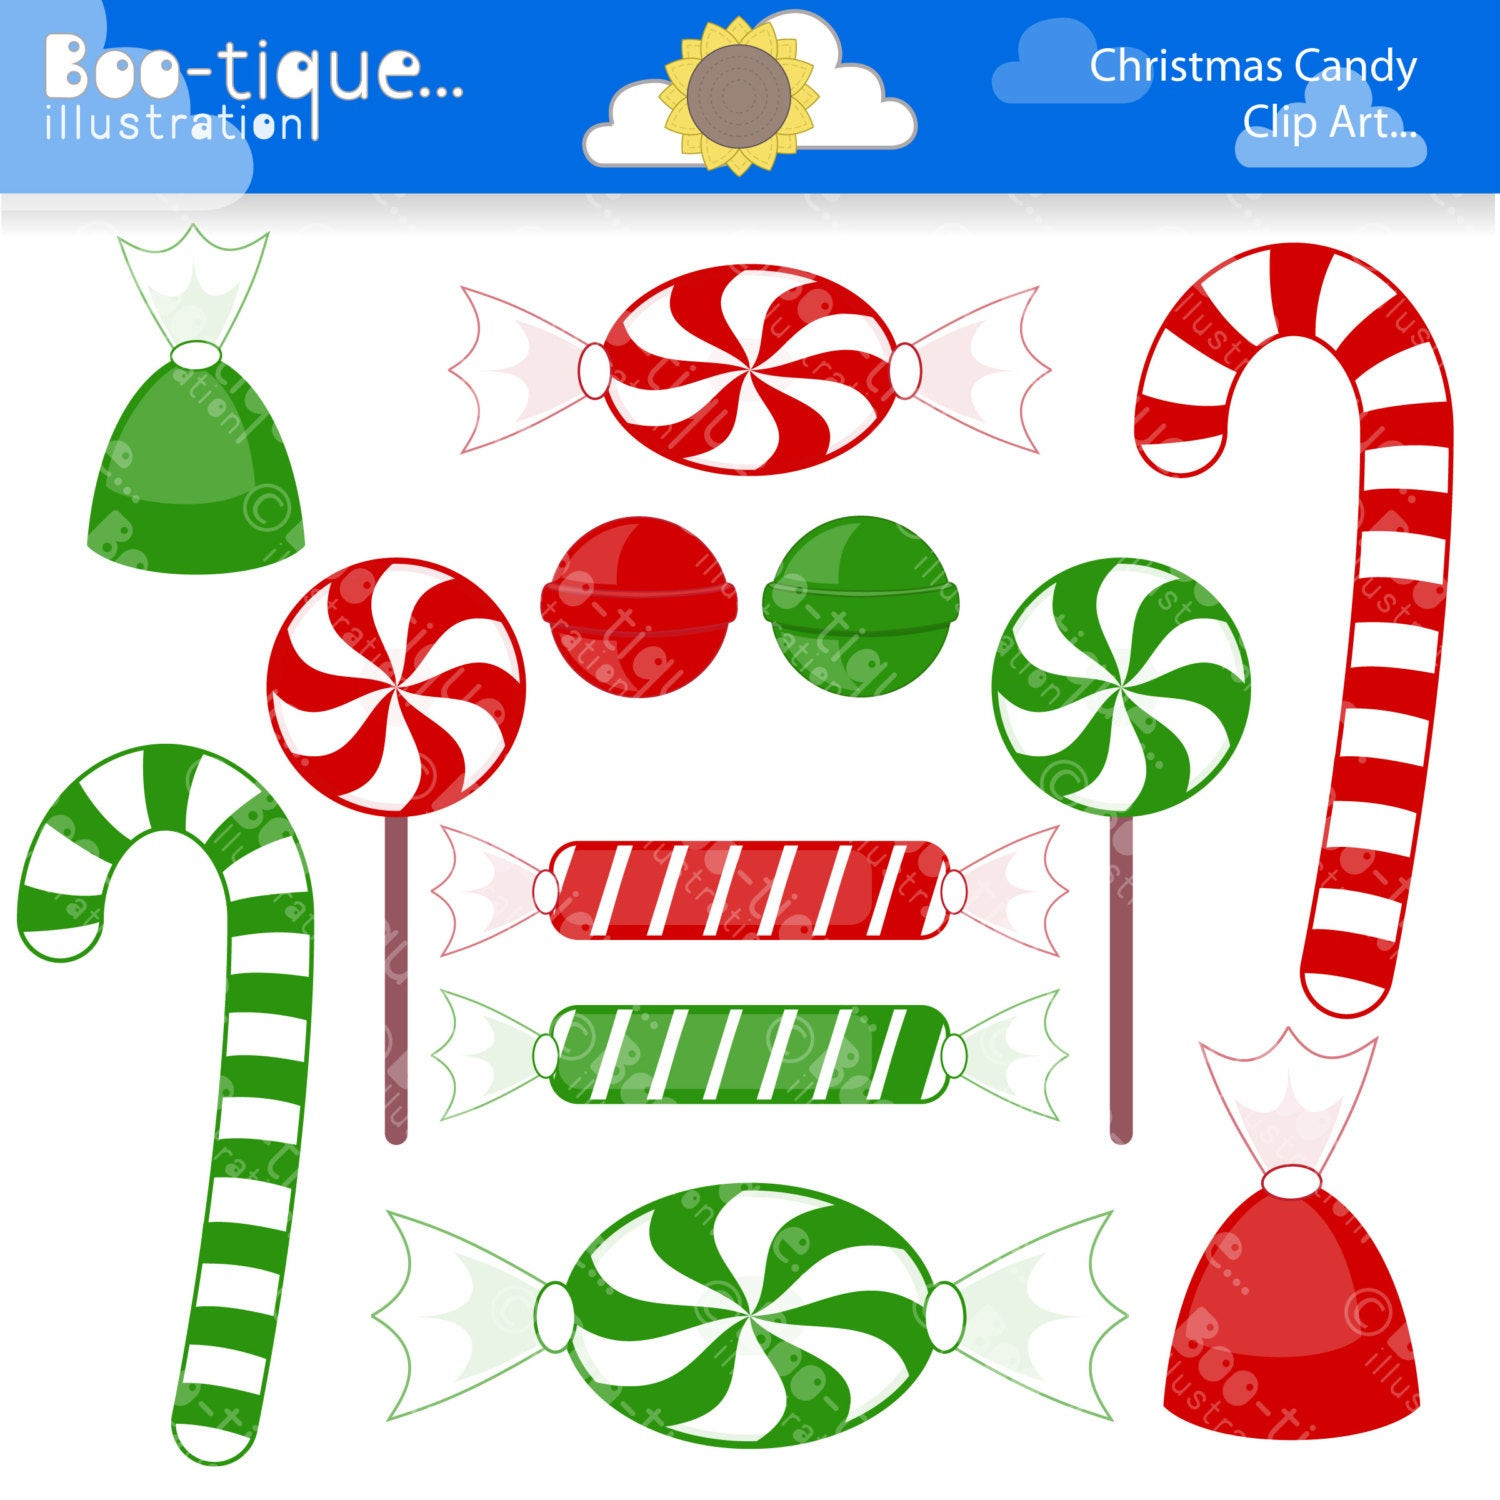 Christmas Candy Clipart
 Christmas Candy Digital Clipart for Instant Download